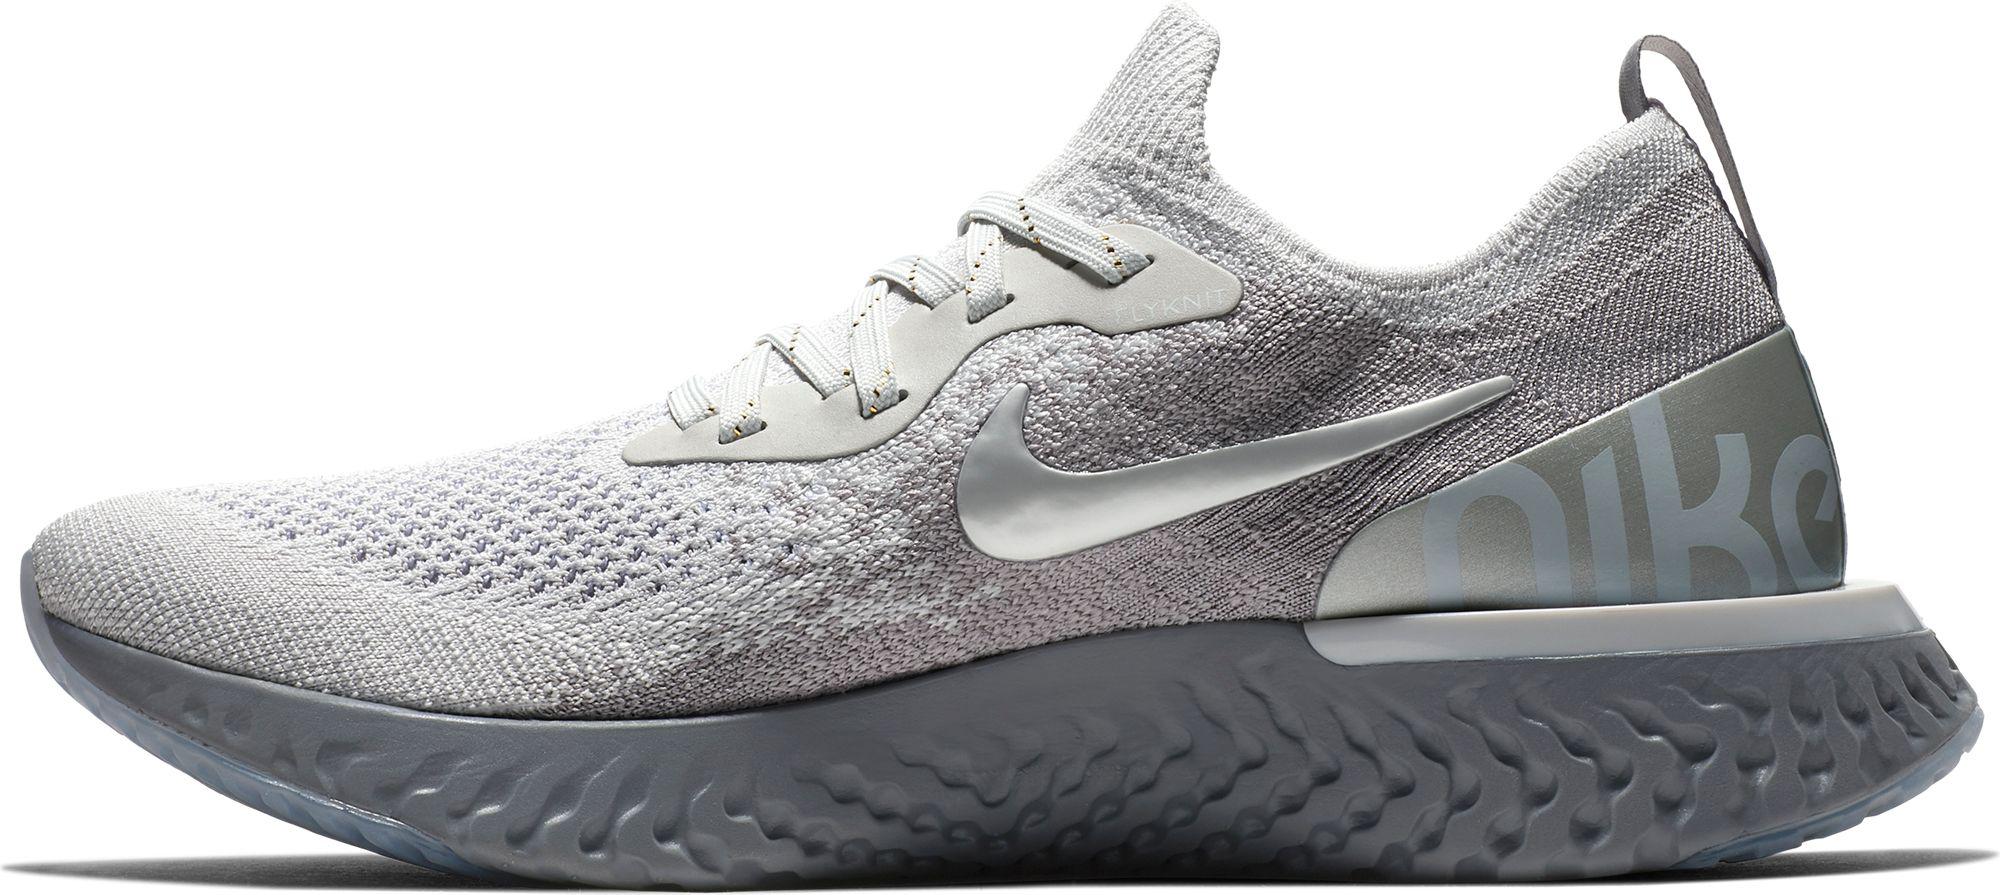 Nike Rubber Epic React Flyknit Running Shoes in Grey/Gold (Gray) - Lyst